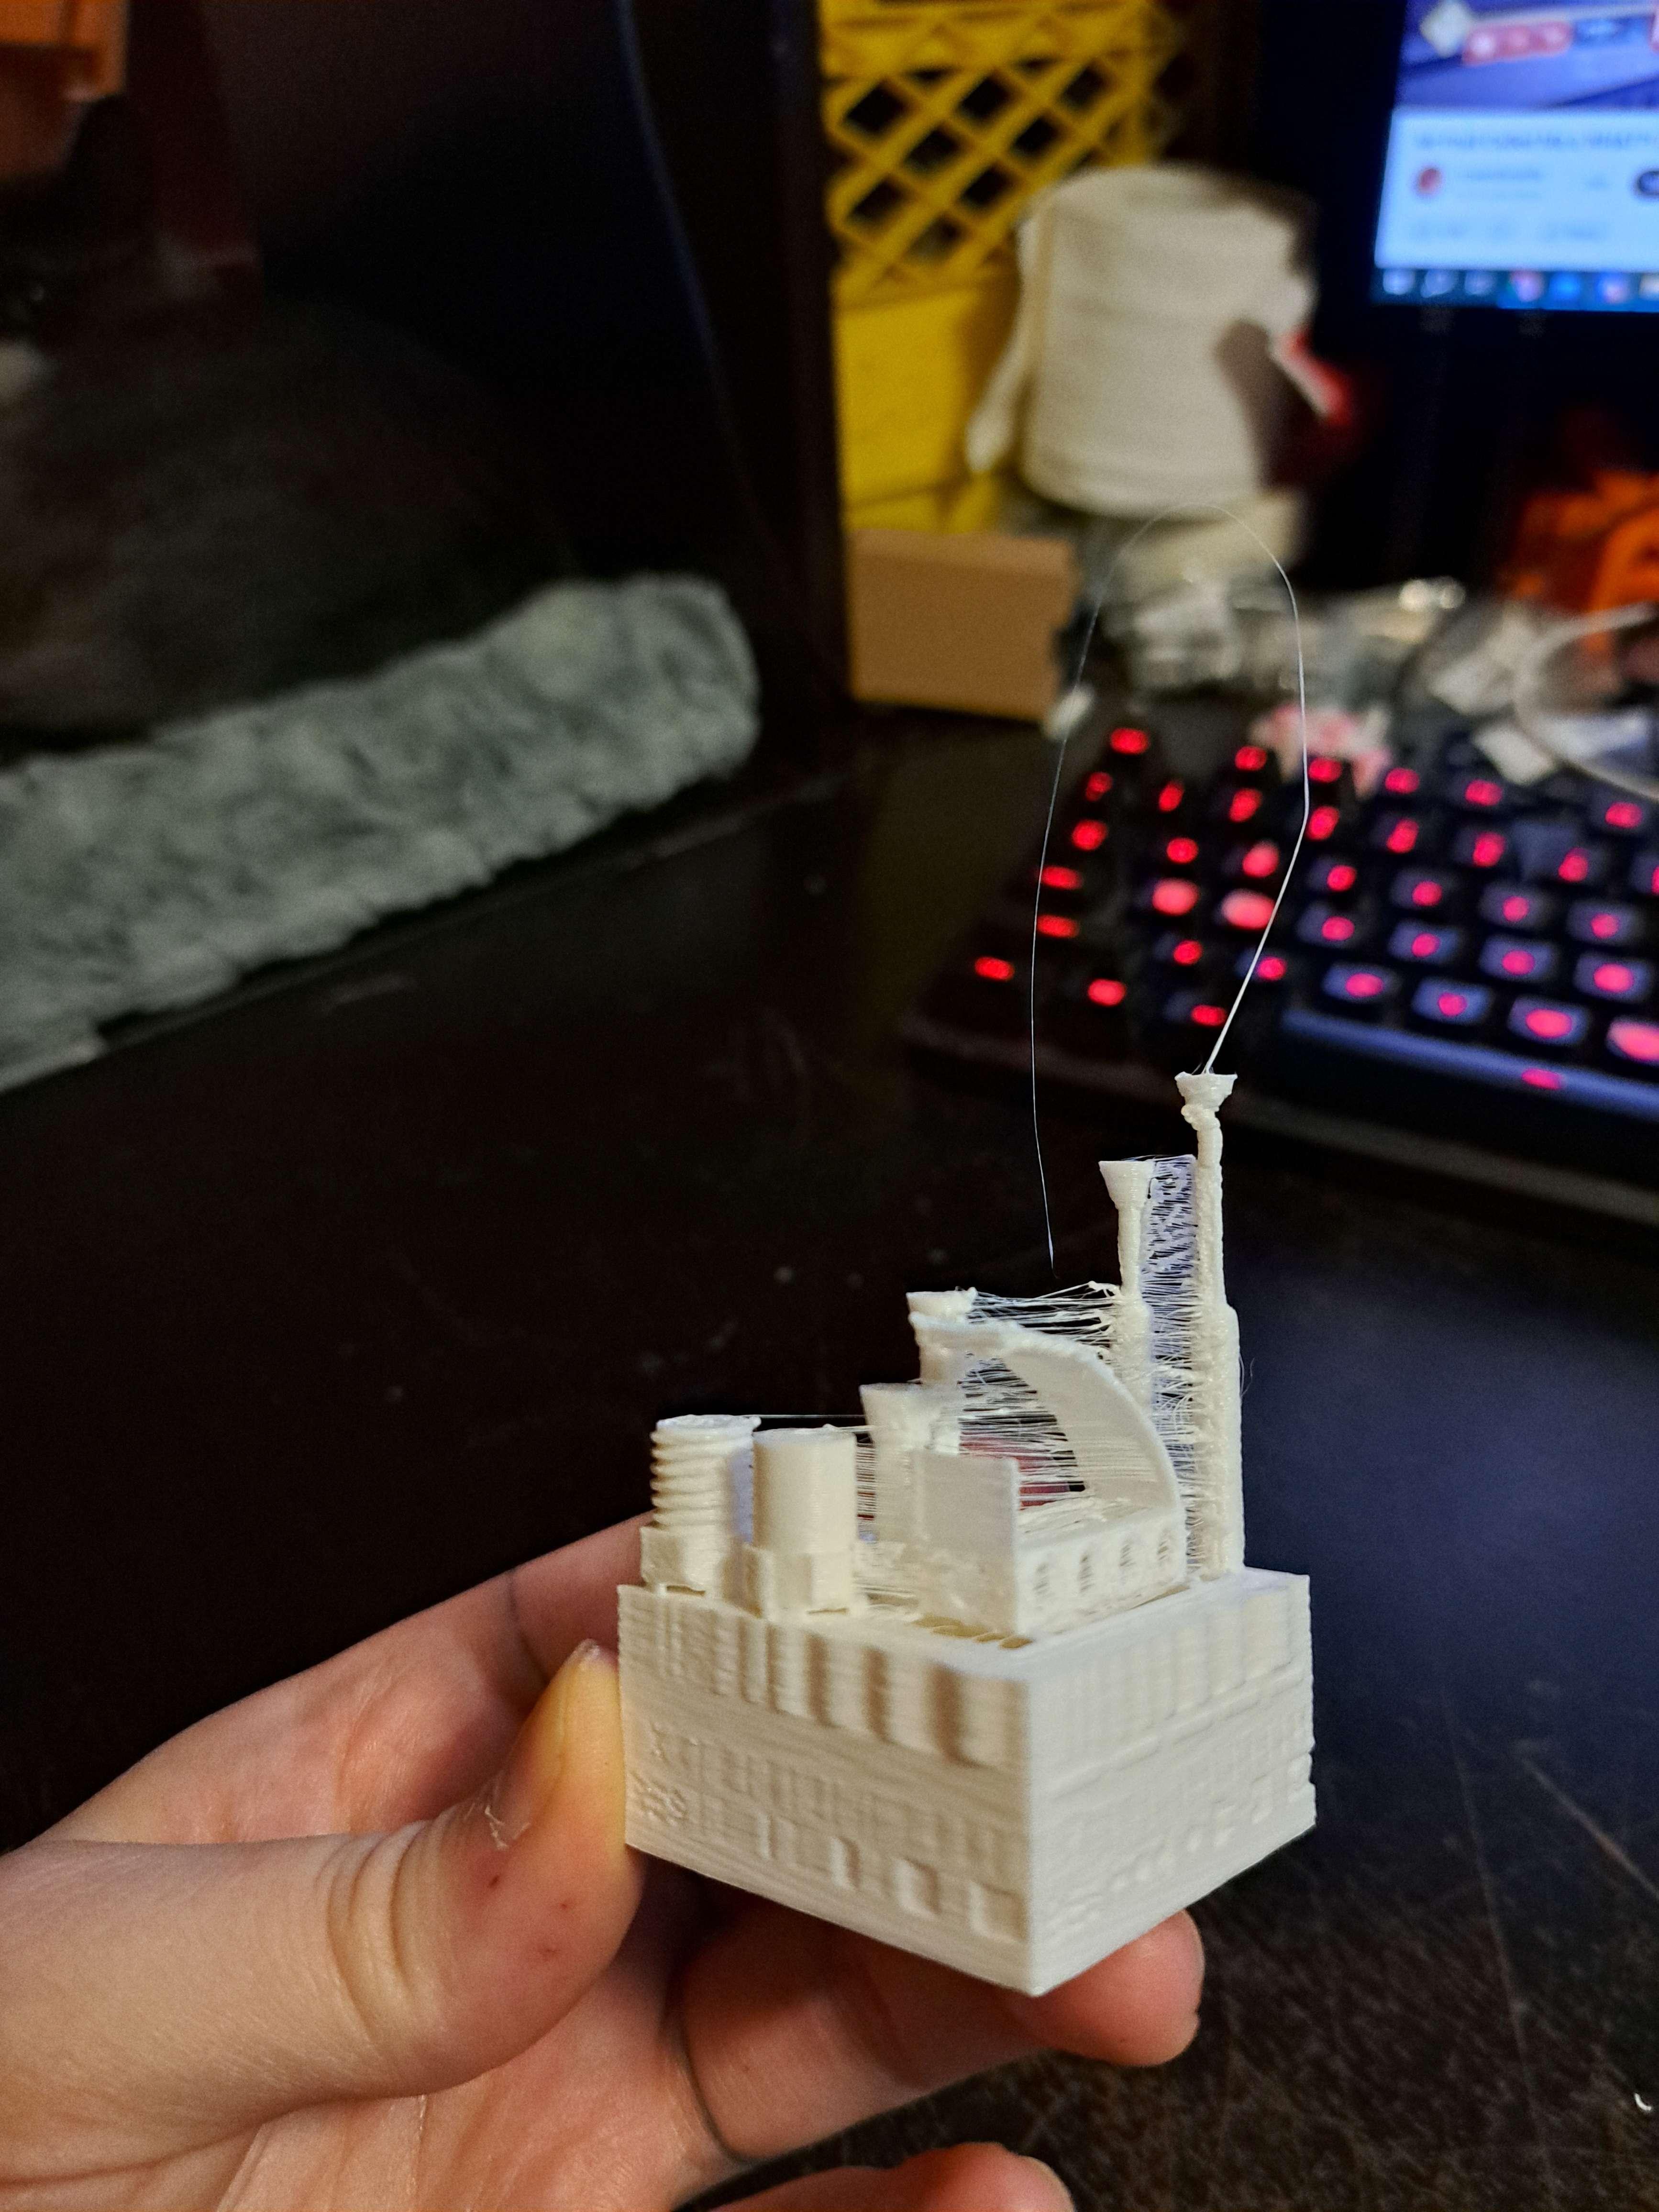 Lost Factory Cube - A generalist *diagnostic* cube - I guess I have a lot of calibrating to do.... (I knew this already but I'm sharing my shame anyway)

31 minute print
Polymaker PolyLite PLA
Modded Ender 3 Pro
 - 3d model